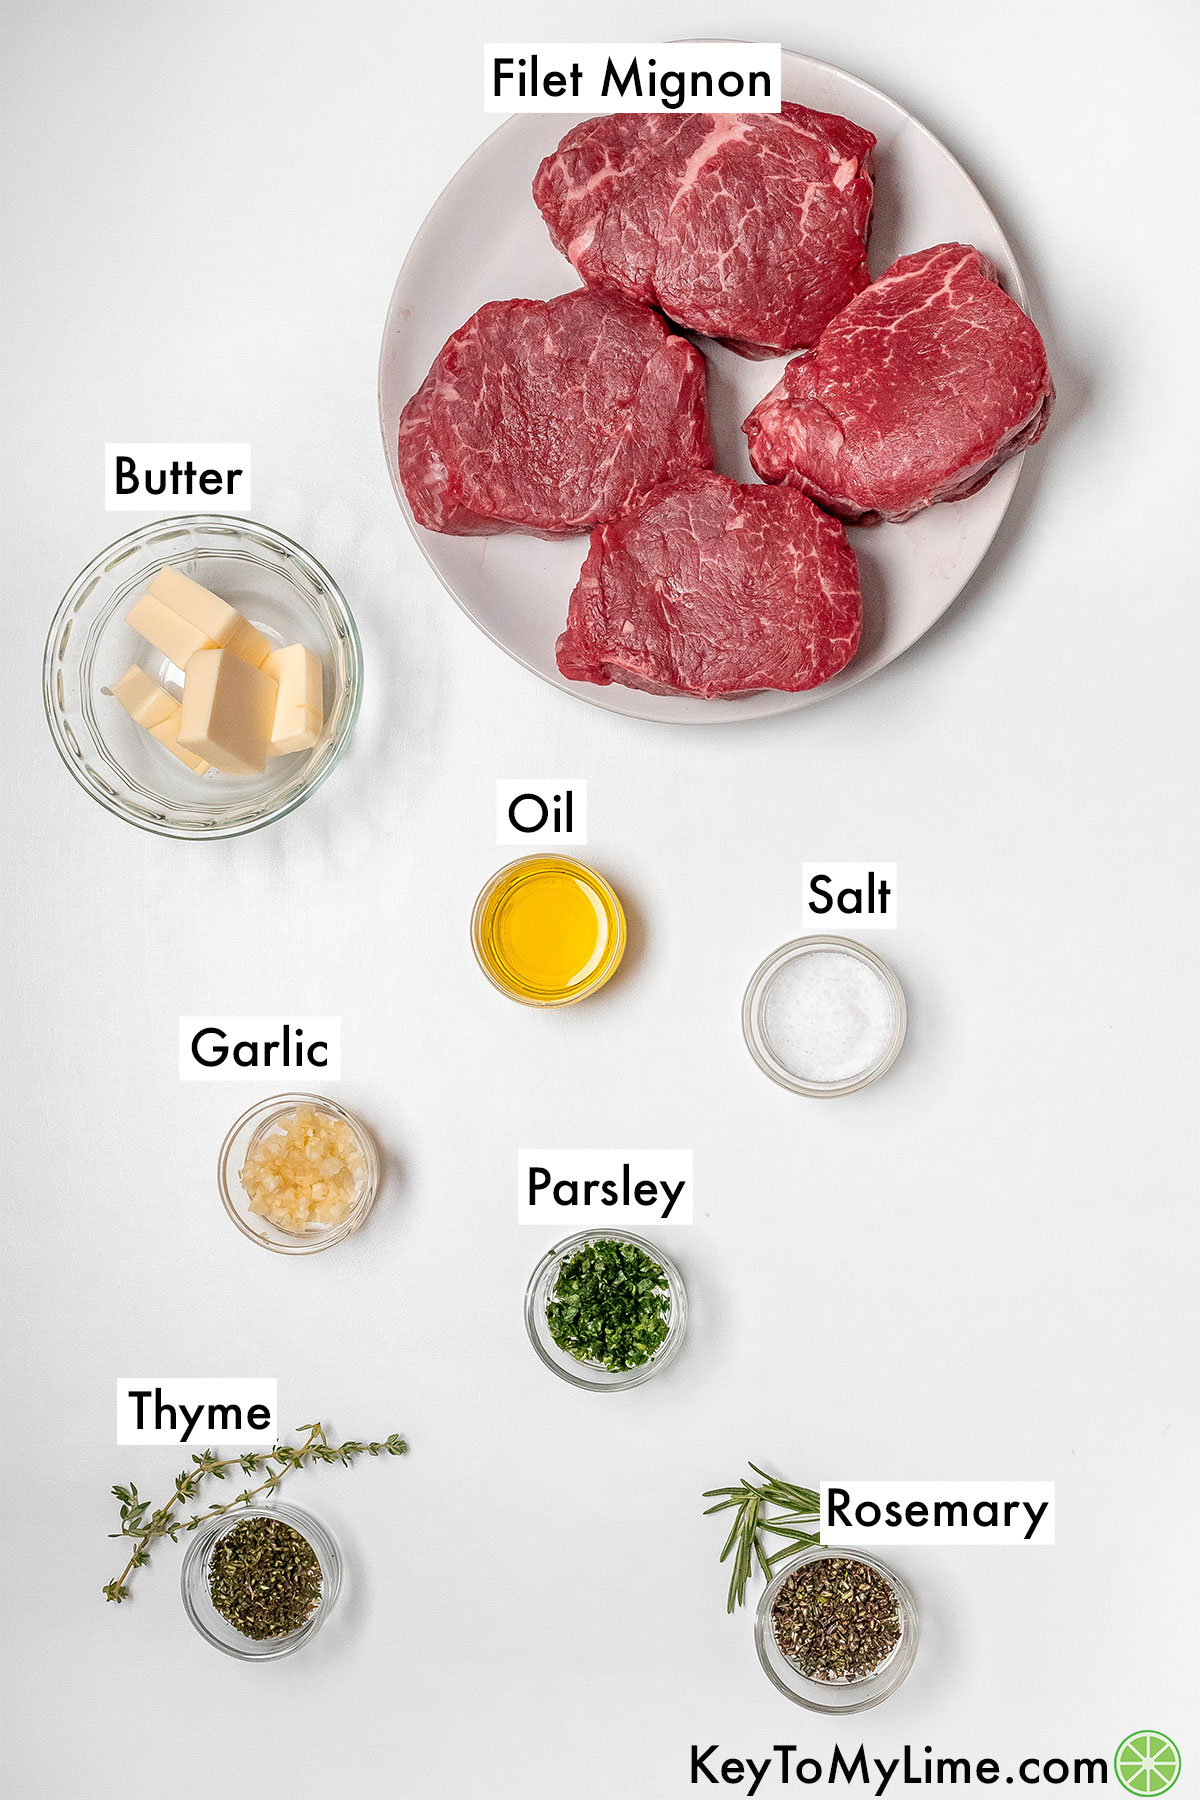 The labeled ingredients for how to cook filet mignon.